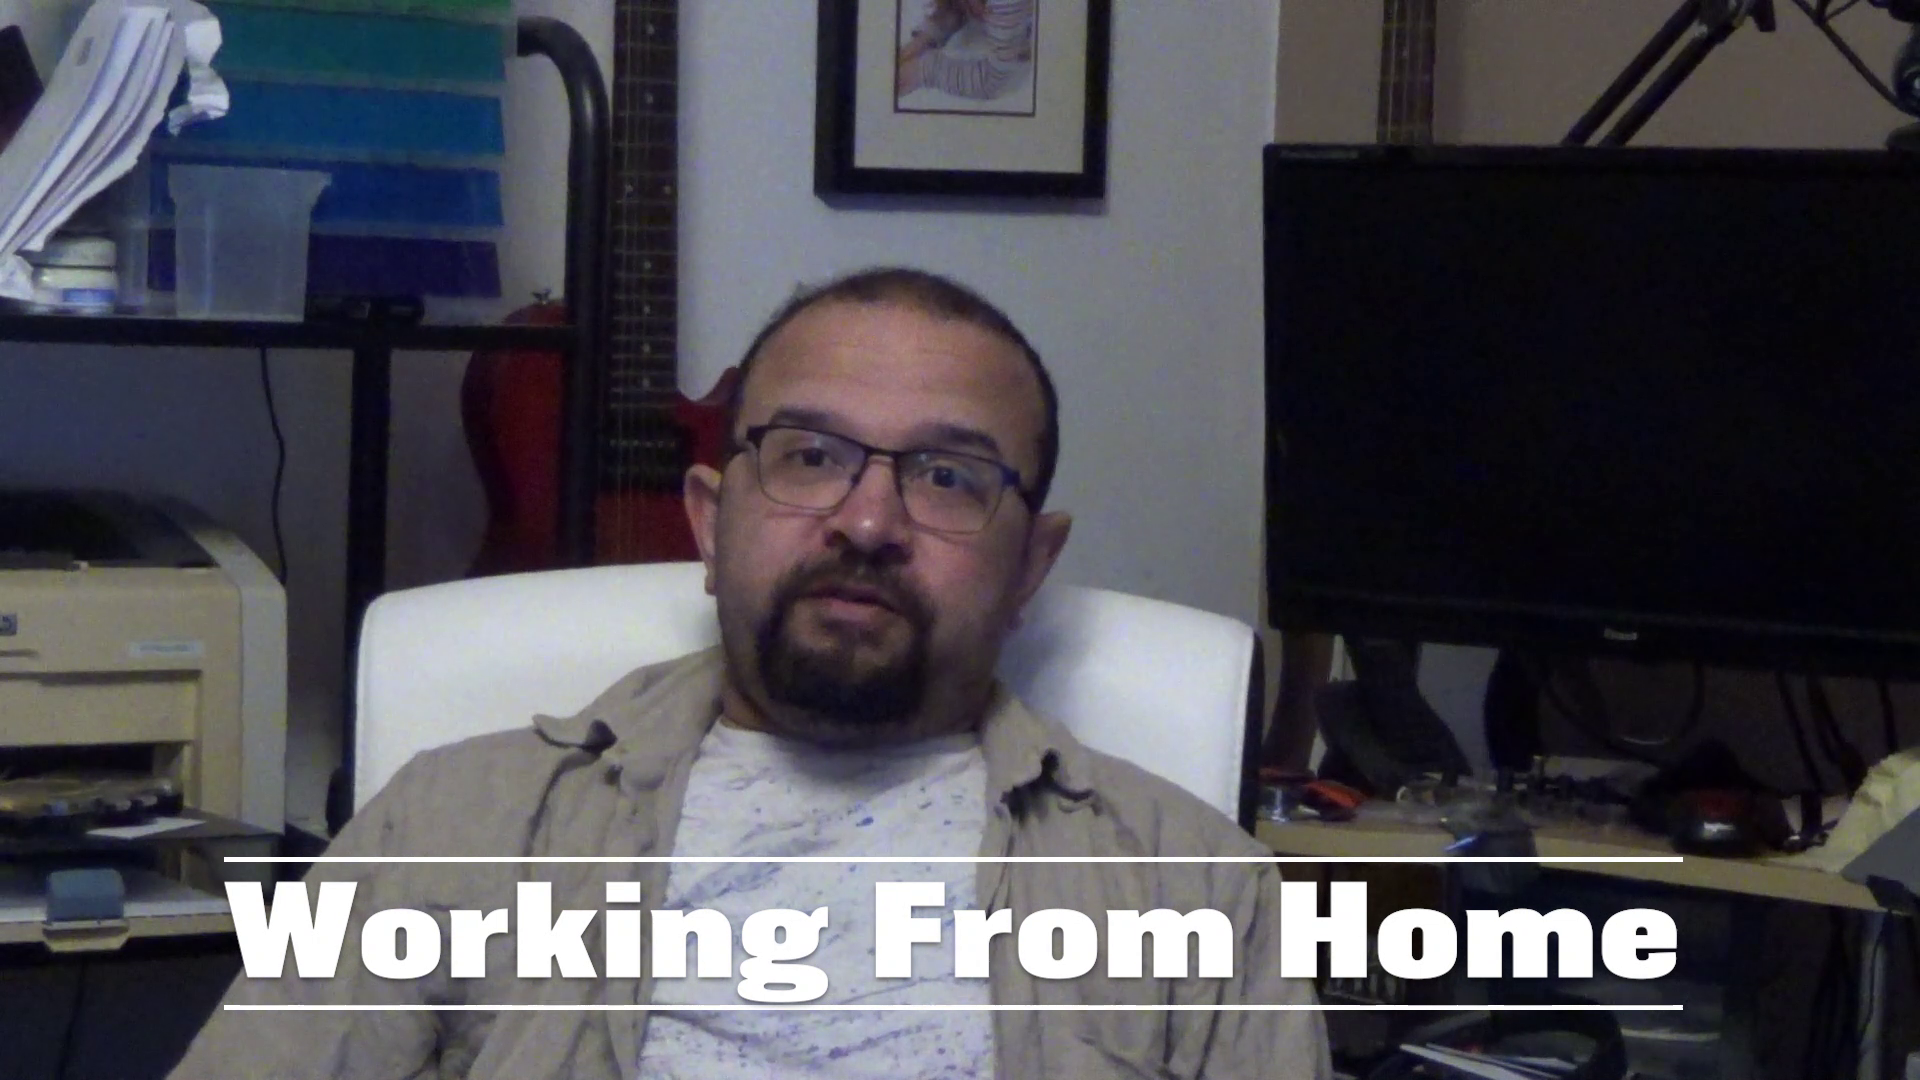 Quarantined: Working From Home